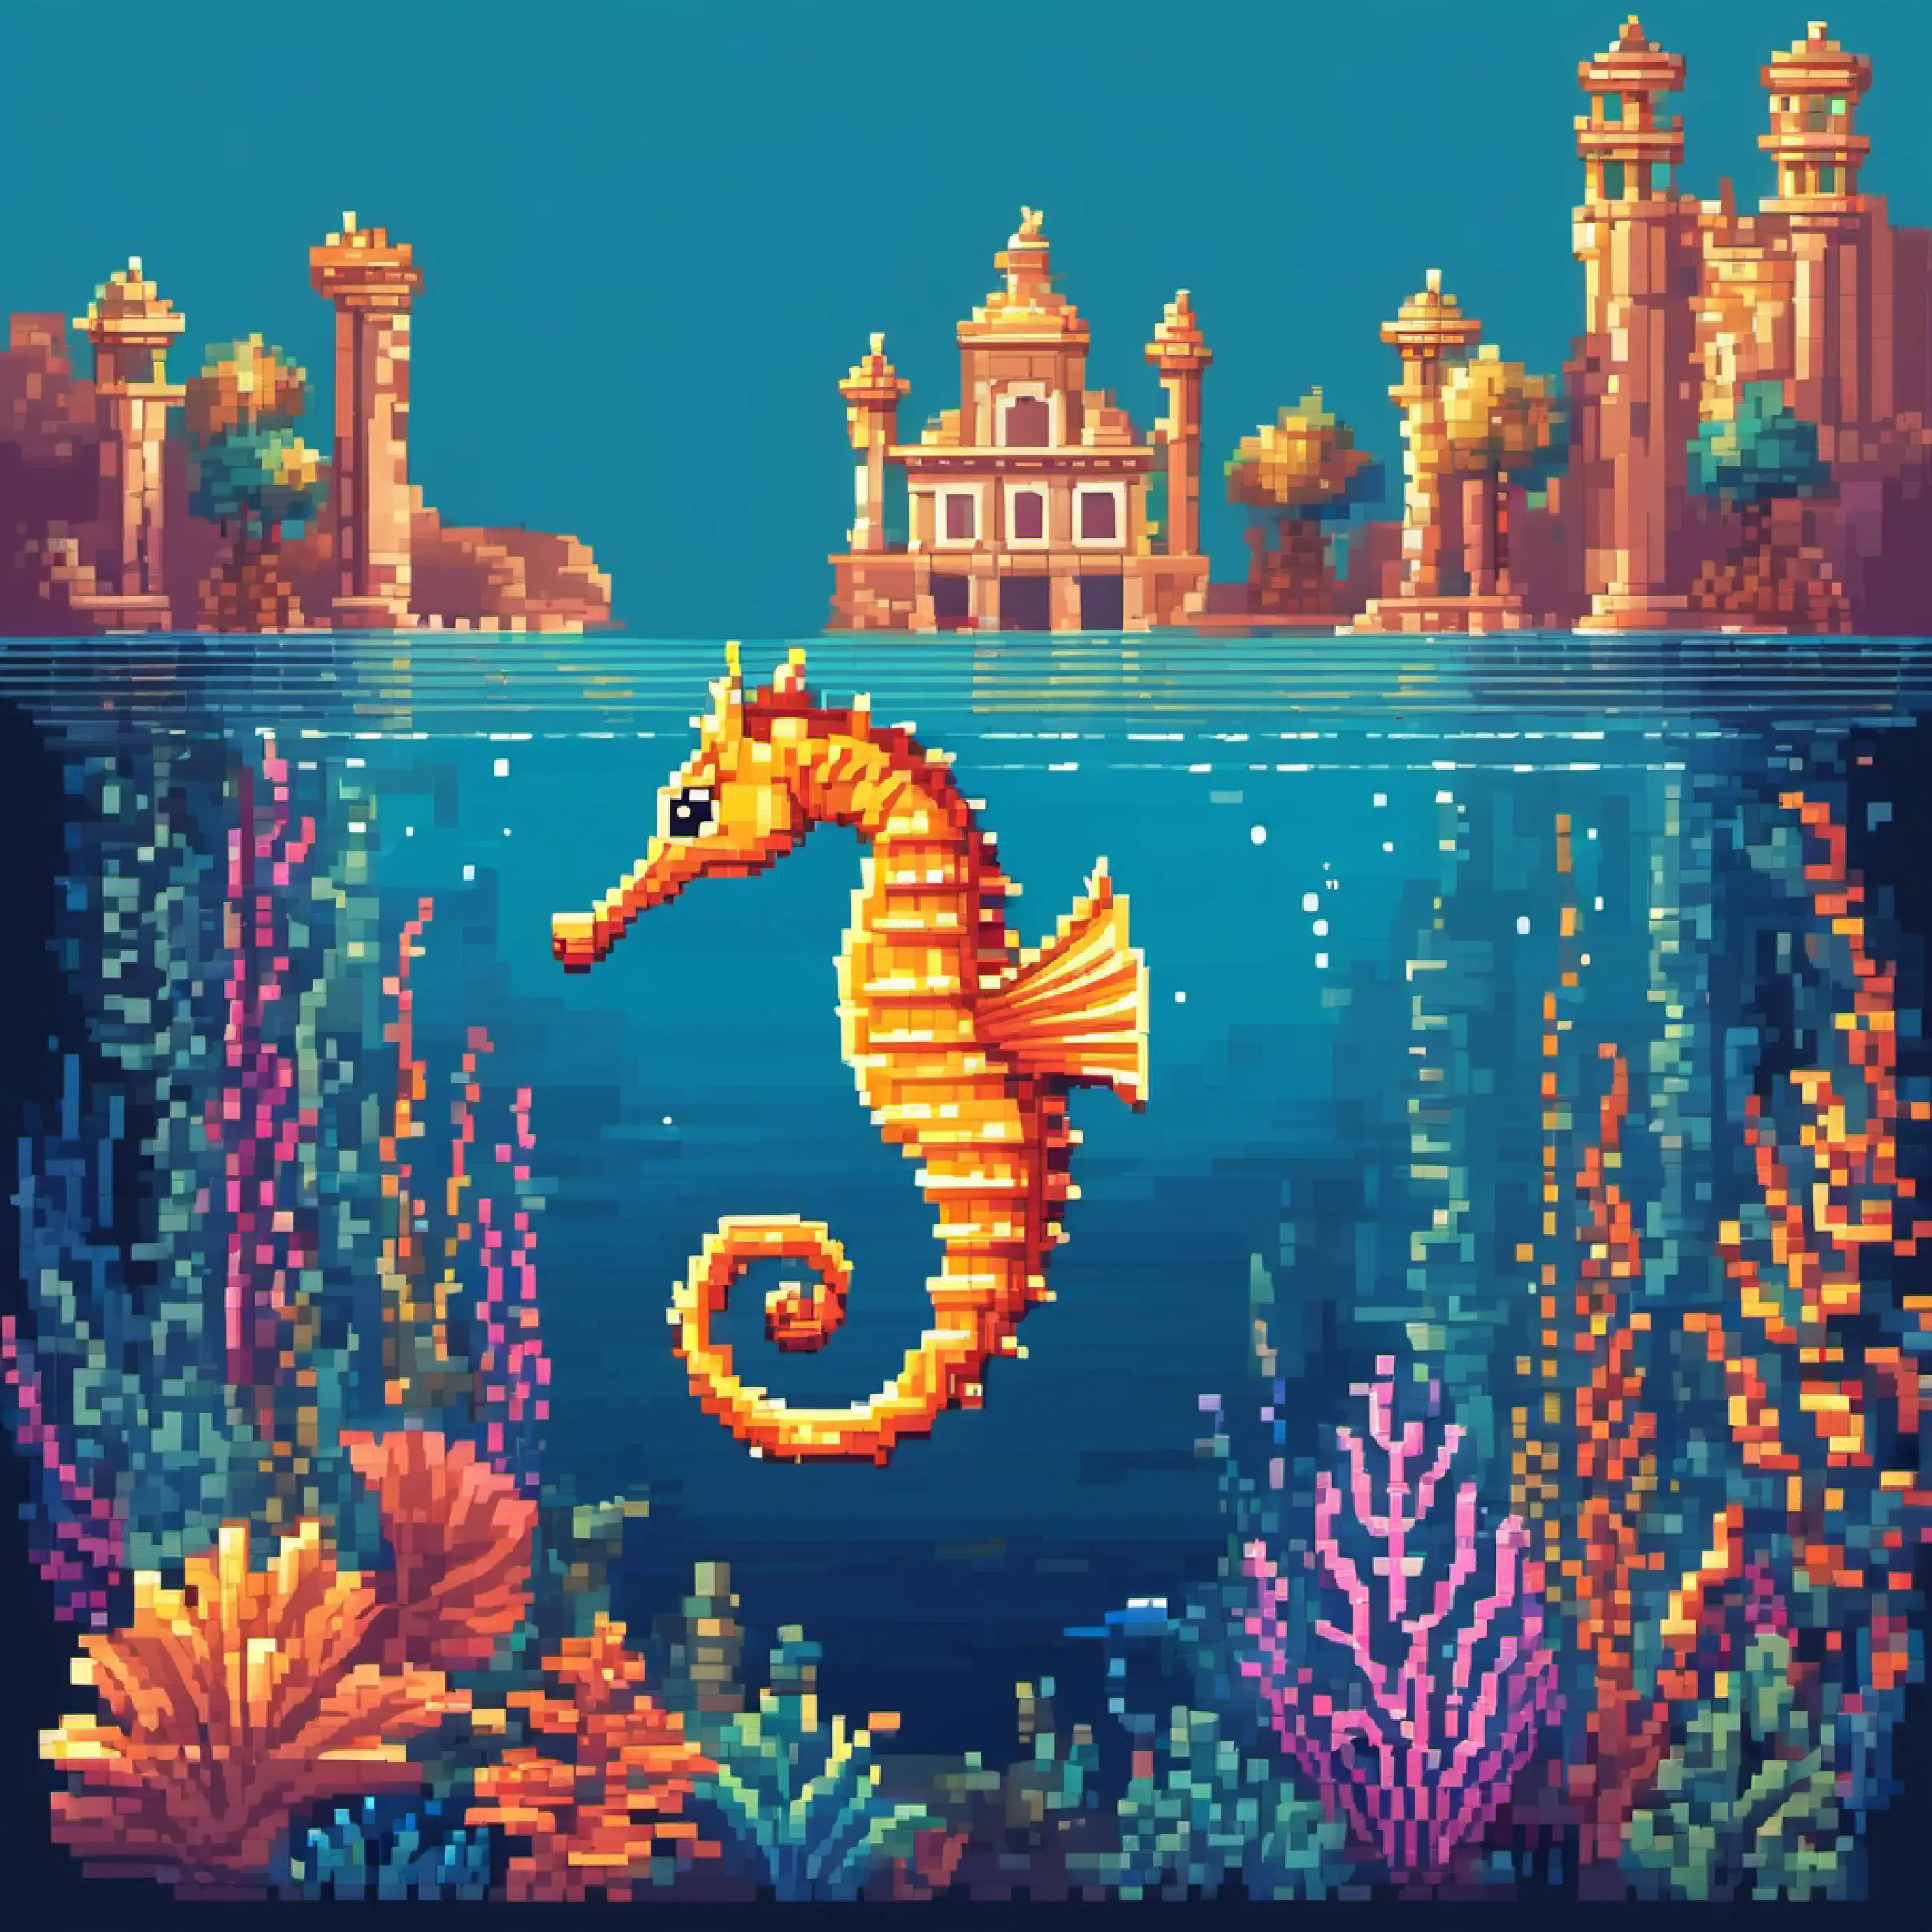 Gentle seahorse with swaying fronds, cautious and observant's worry about the danger and distance of the Sunken City, expressing caution.